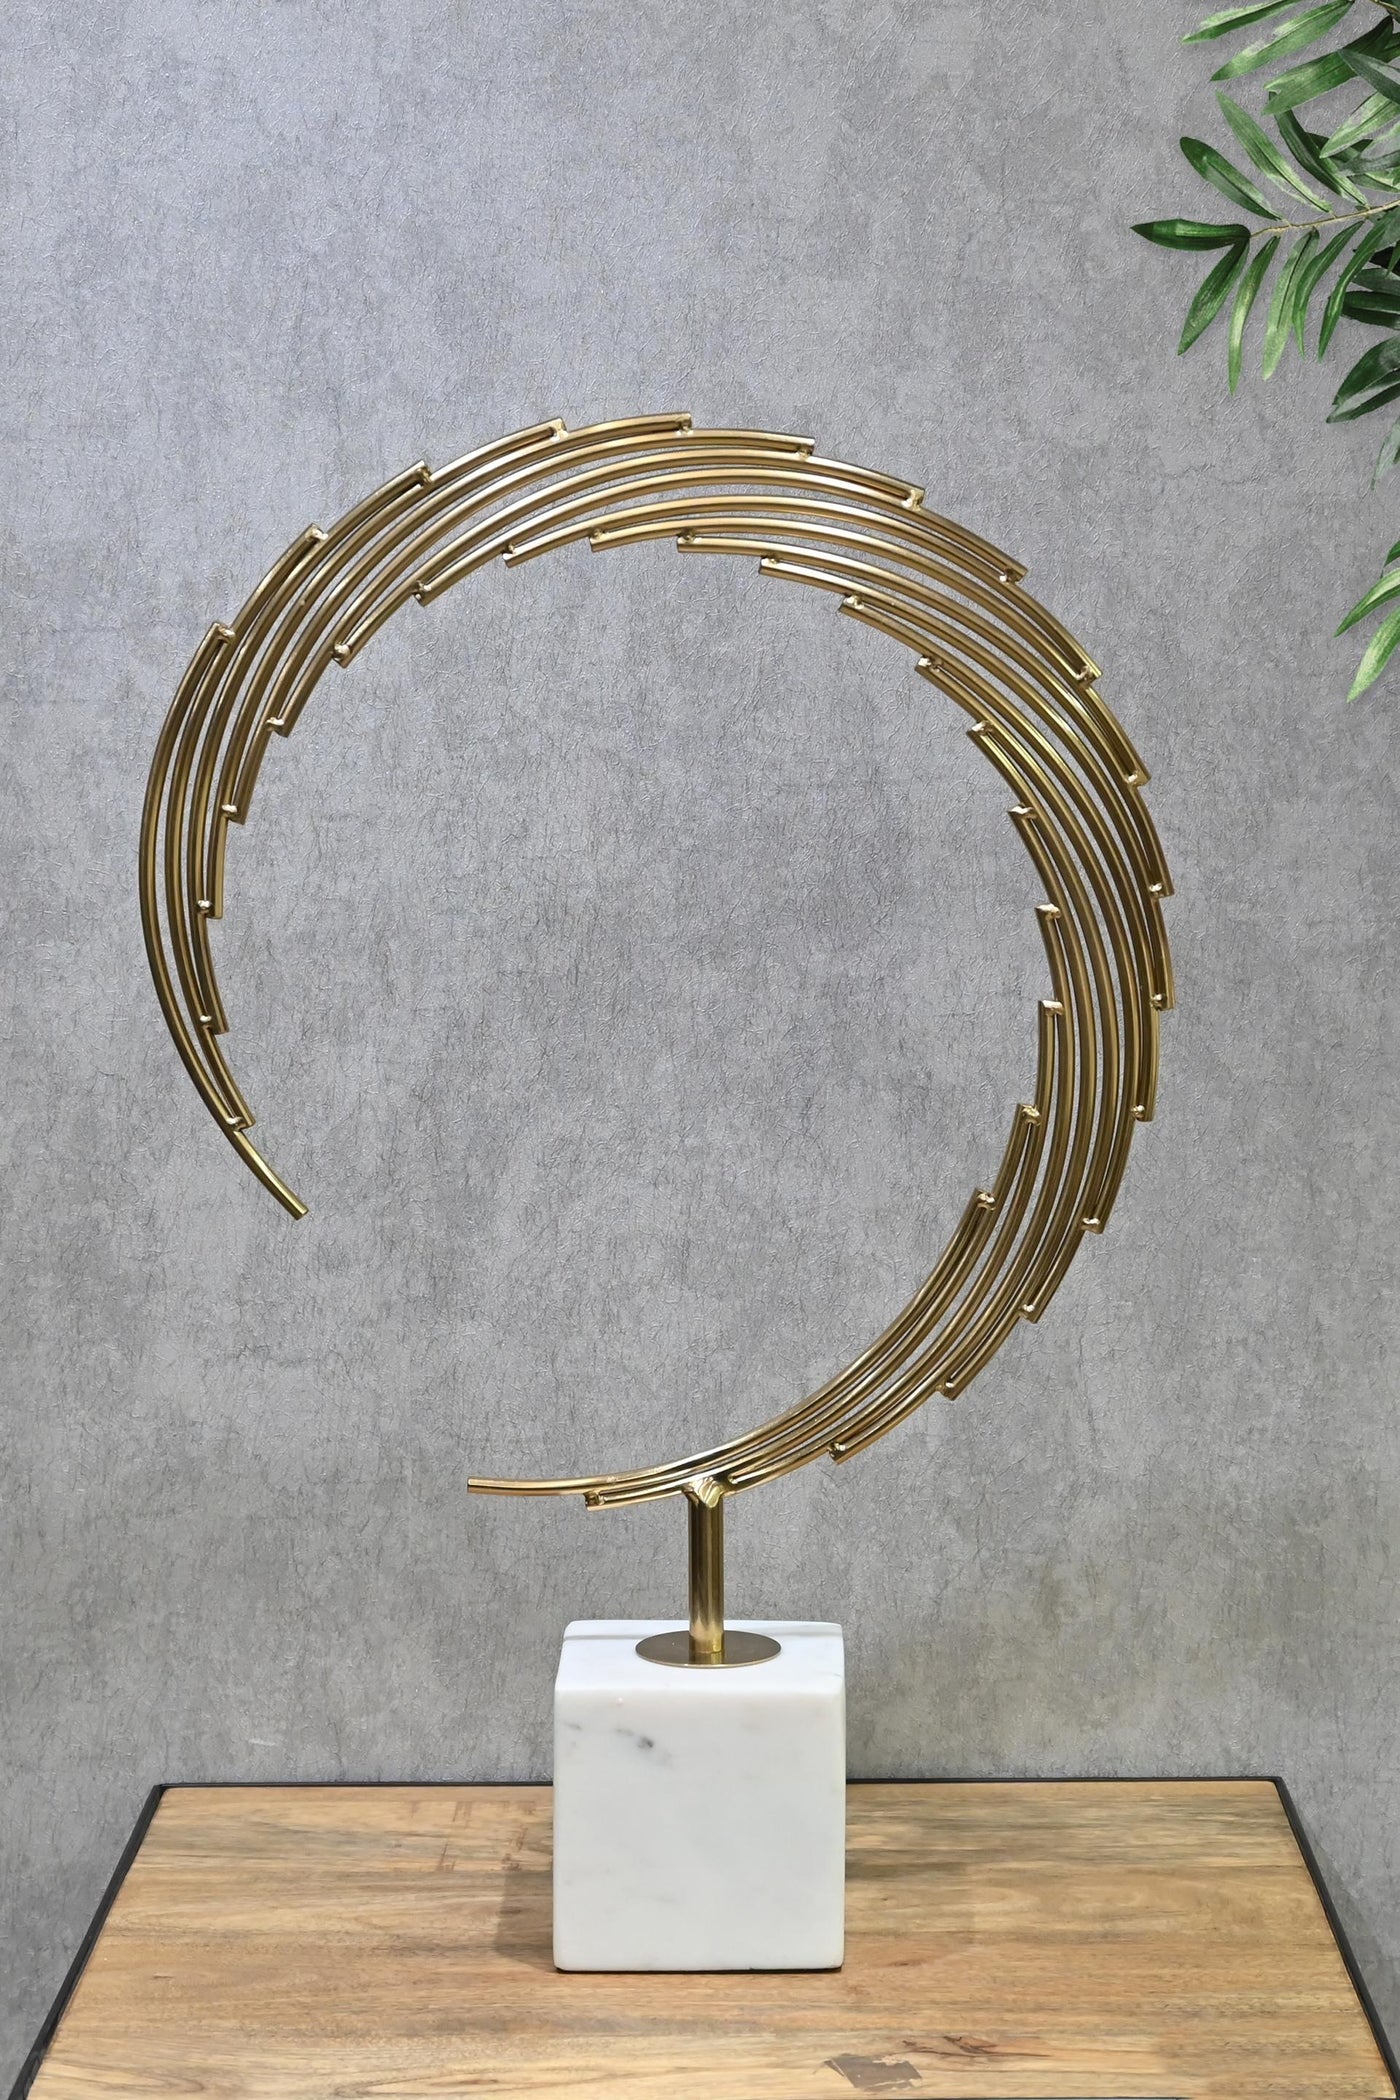 Curved Gold Rods Metal Sculpture Artifacts for your Home or Office Decor-Large